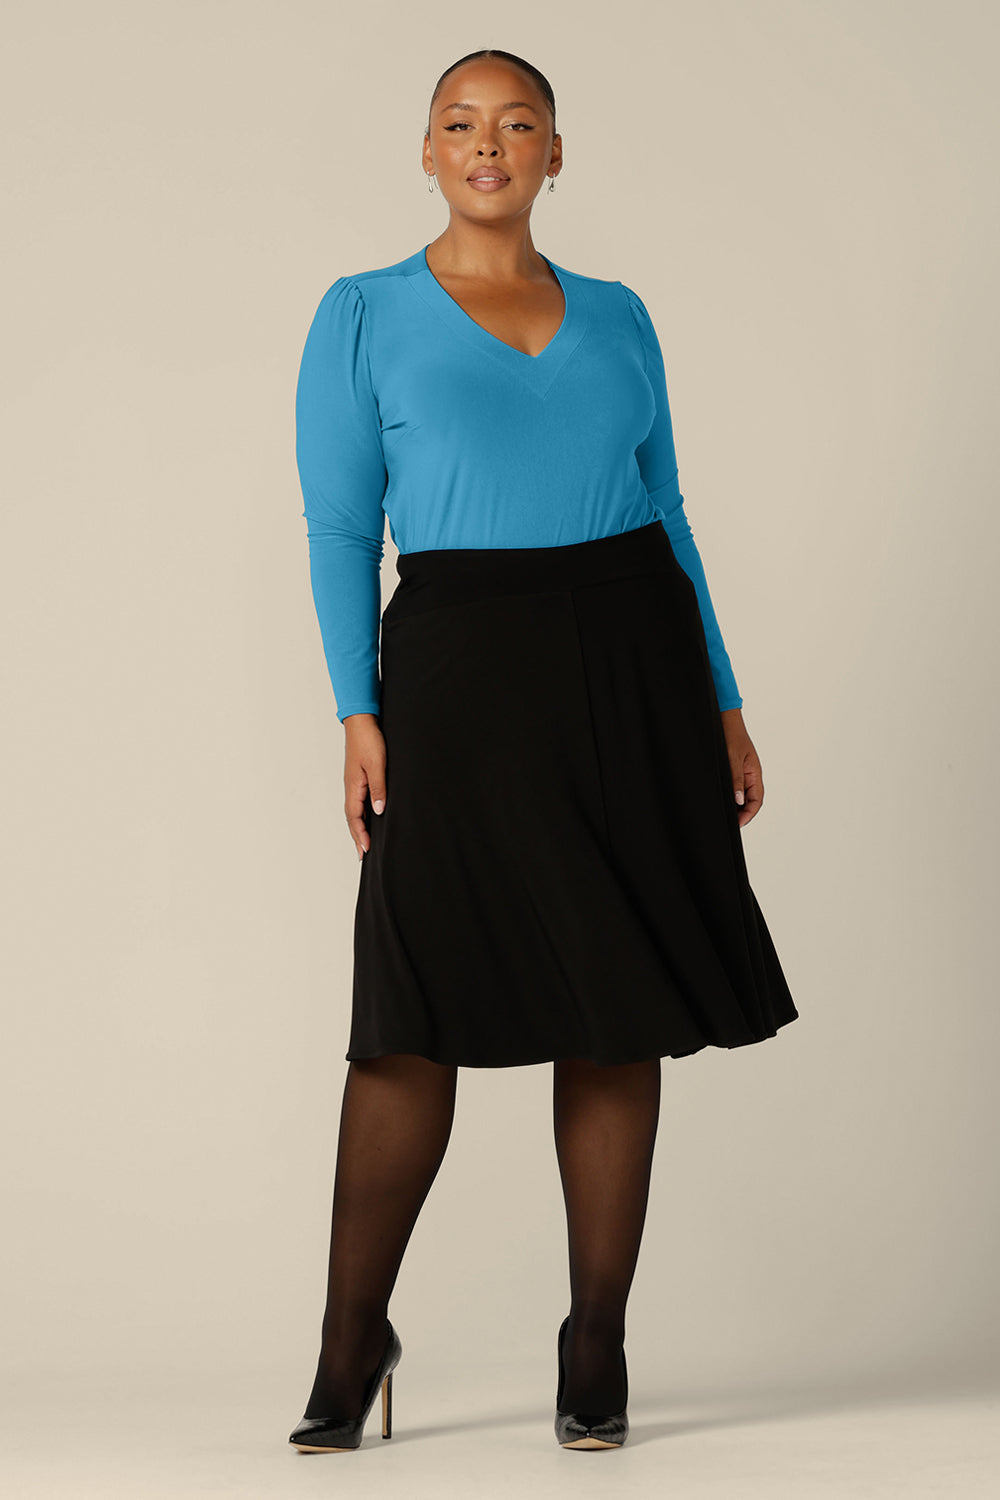 A plus size, size 18 woman wears a long sleeve, V-neck top in Opal blue jersey. Made in Australia by Australian and New Zealand women's clothing label, L&F, this top is worn with a navy blue, knee-length skirt for work. 